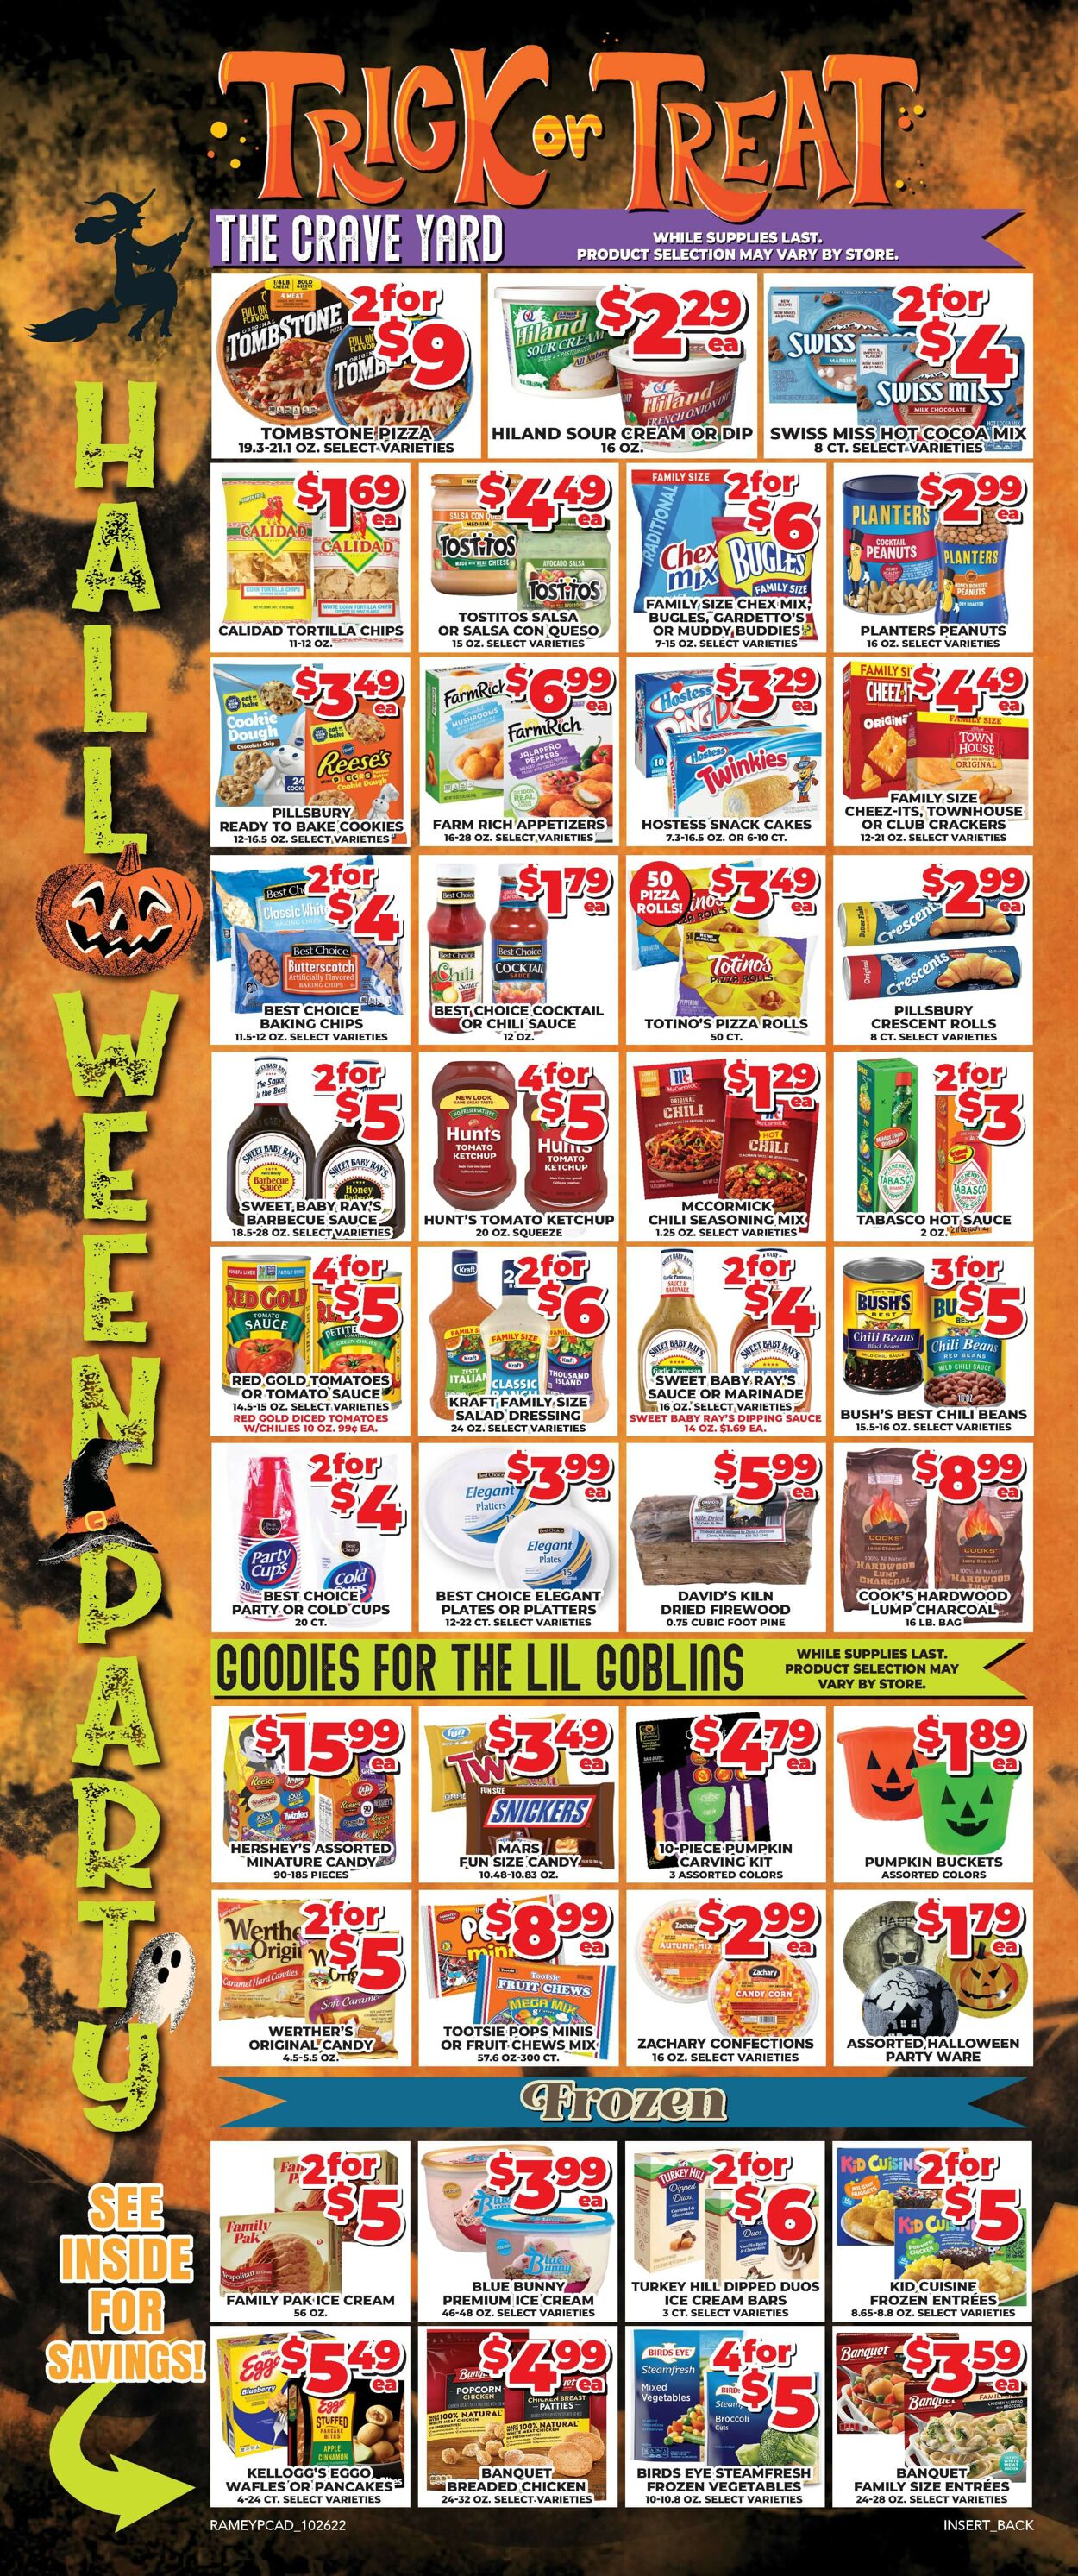 Price Cutter Weekly Ad Circular - valid 10/26-11/01/2022 (Page 4)